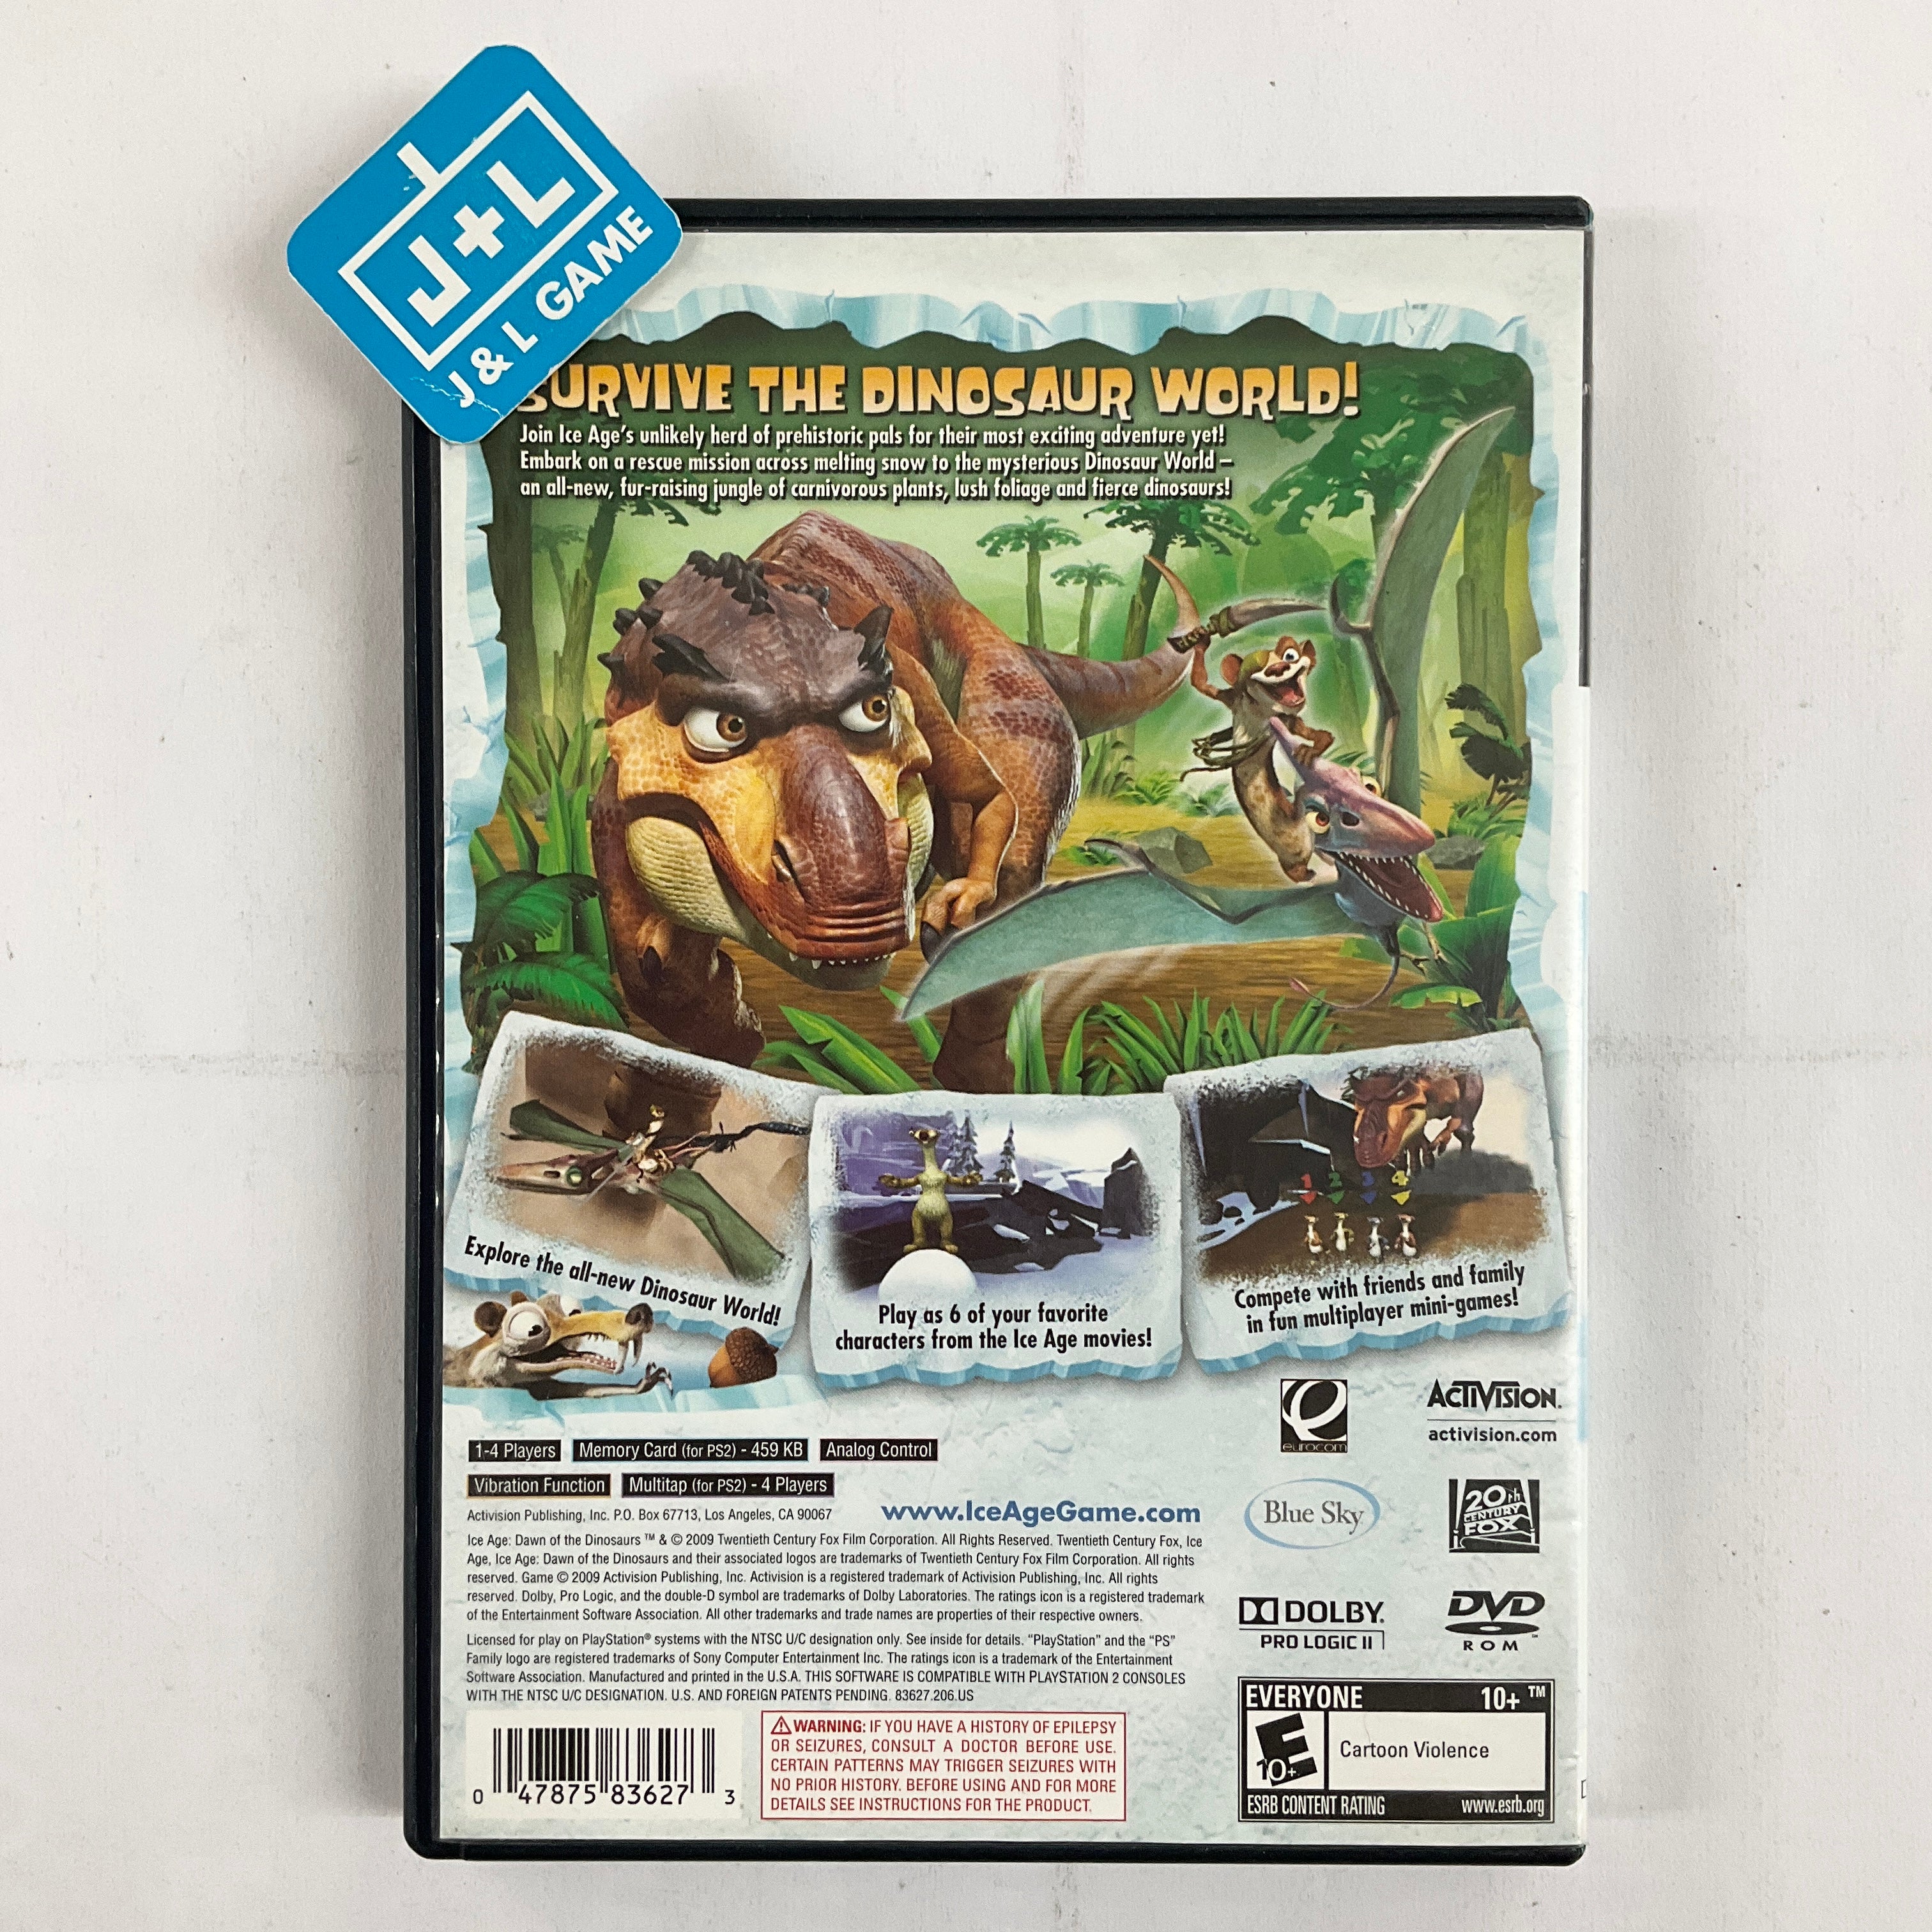 Ice Age: Dawn of the Dinosaurs - (PS2) PlayStation 2 [Pre-Owned] Video Games Activision   